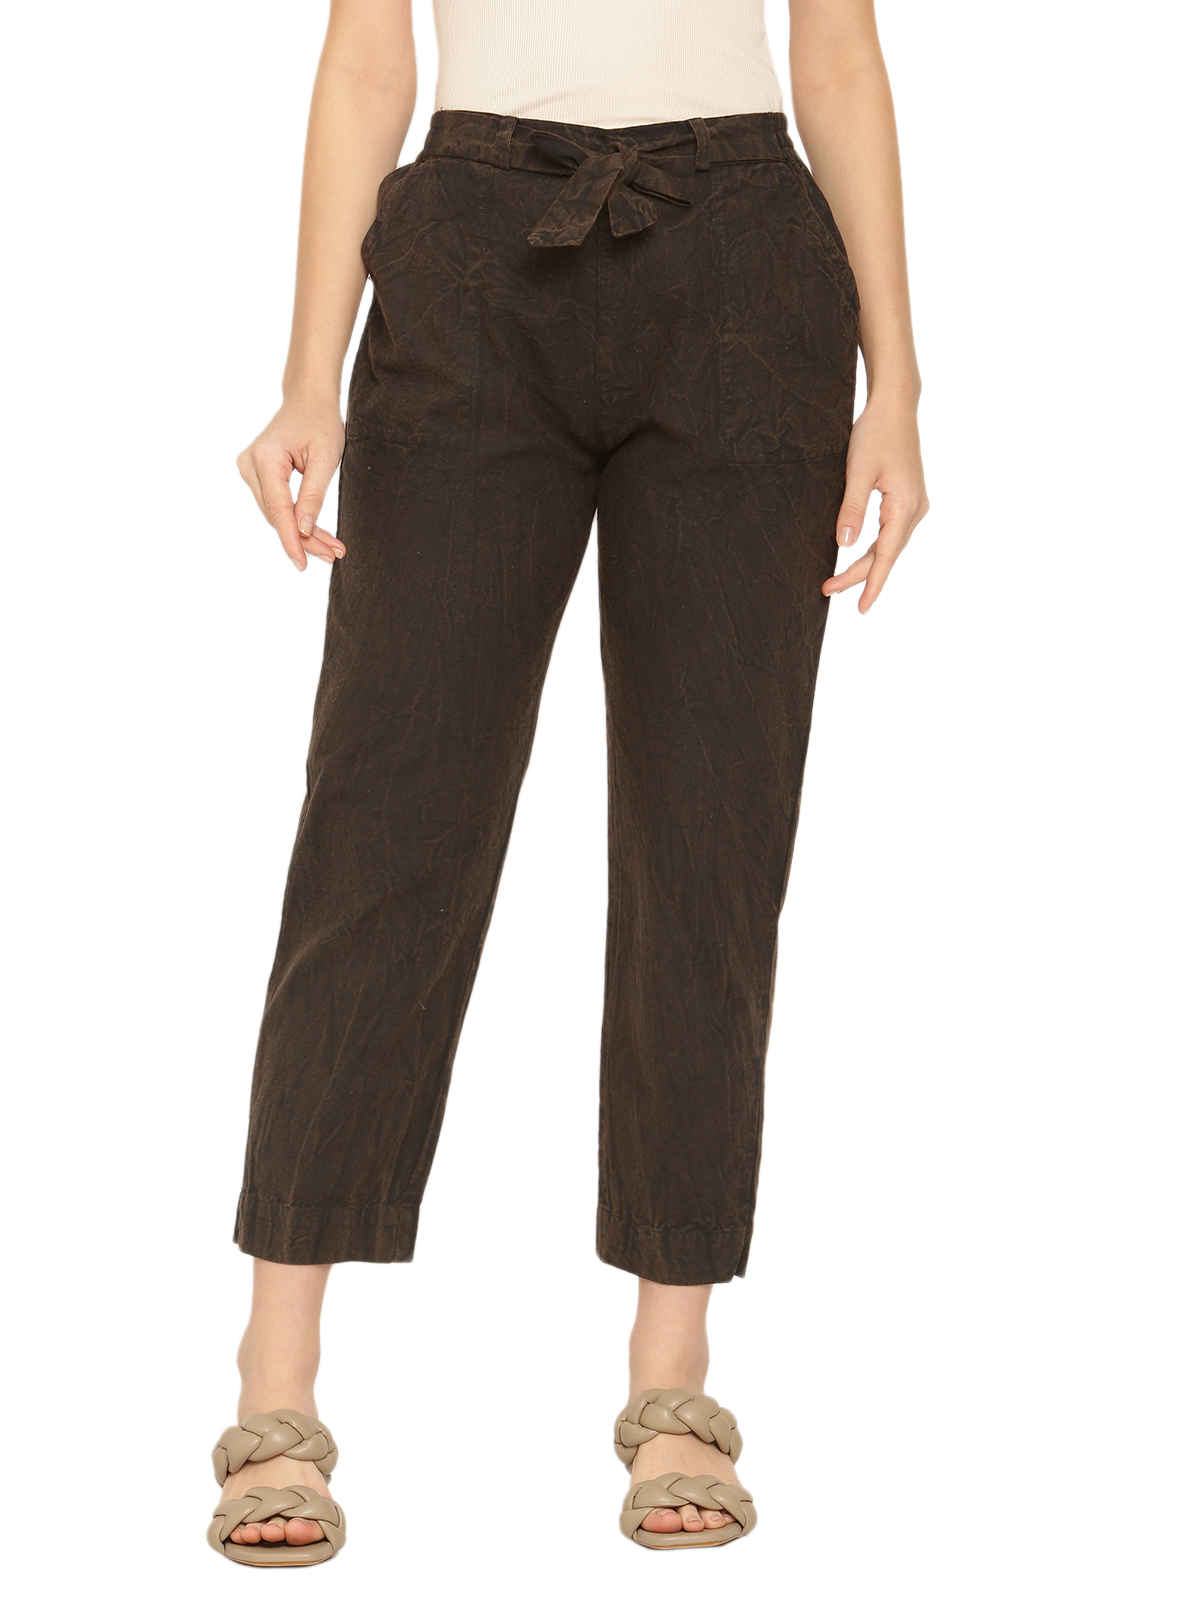 Buy ladies Cotton Trouser Online in India | Shop Trousers for ladies Online